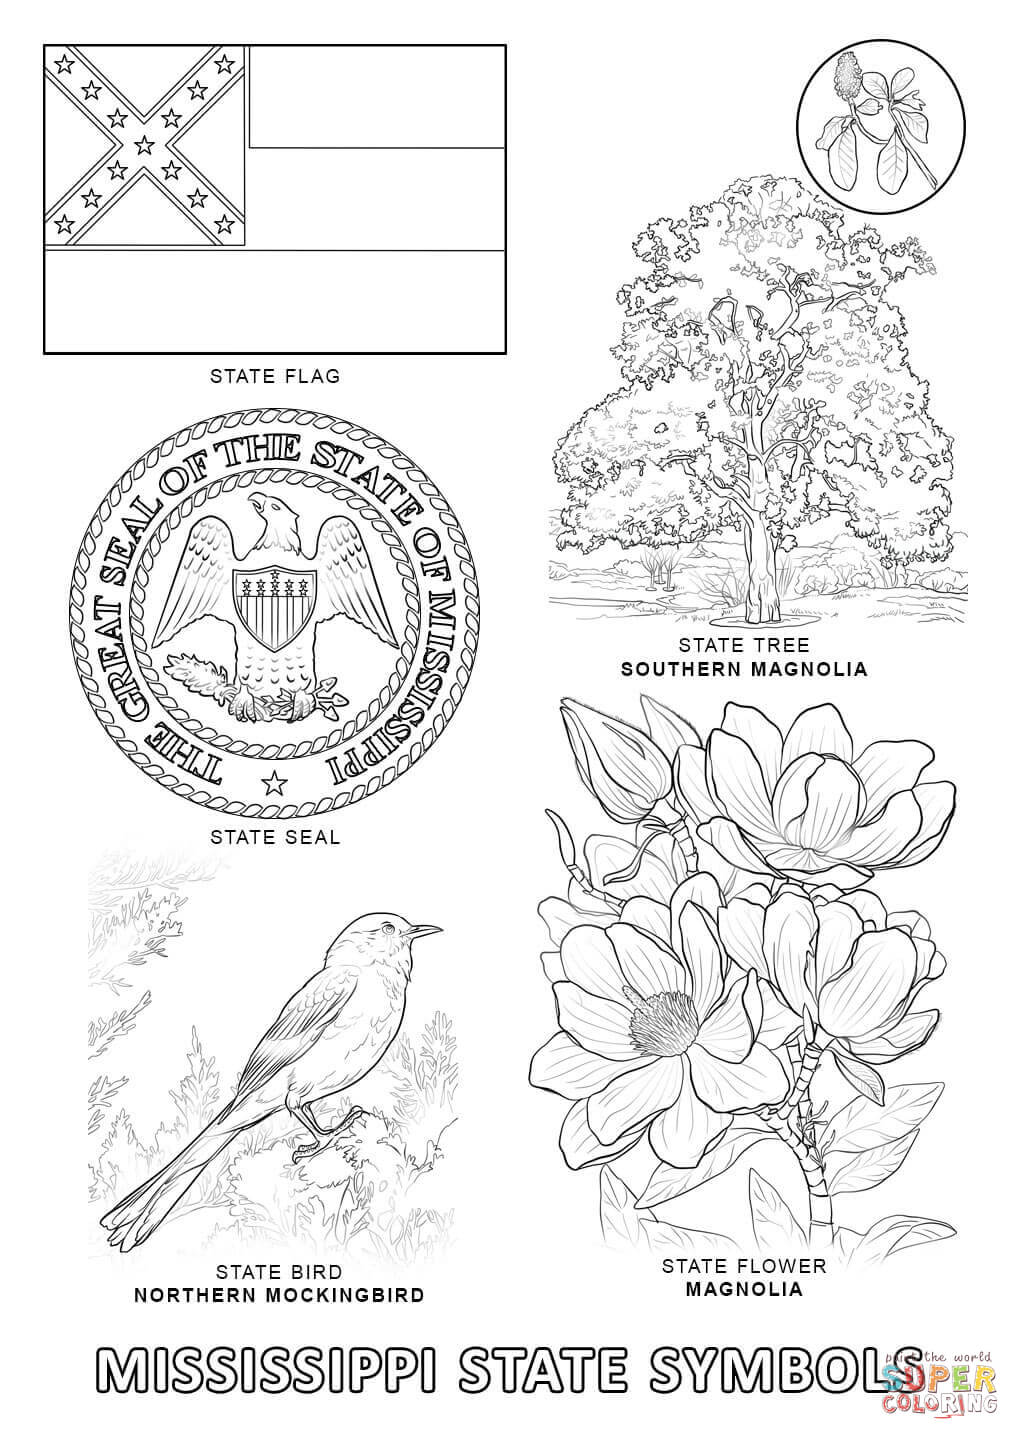 Mississippi State Symbols coloring page | Free Printable Coloring ...